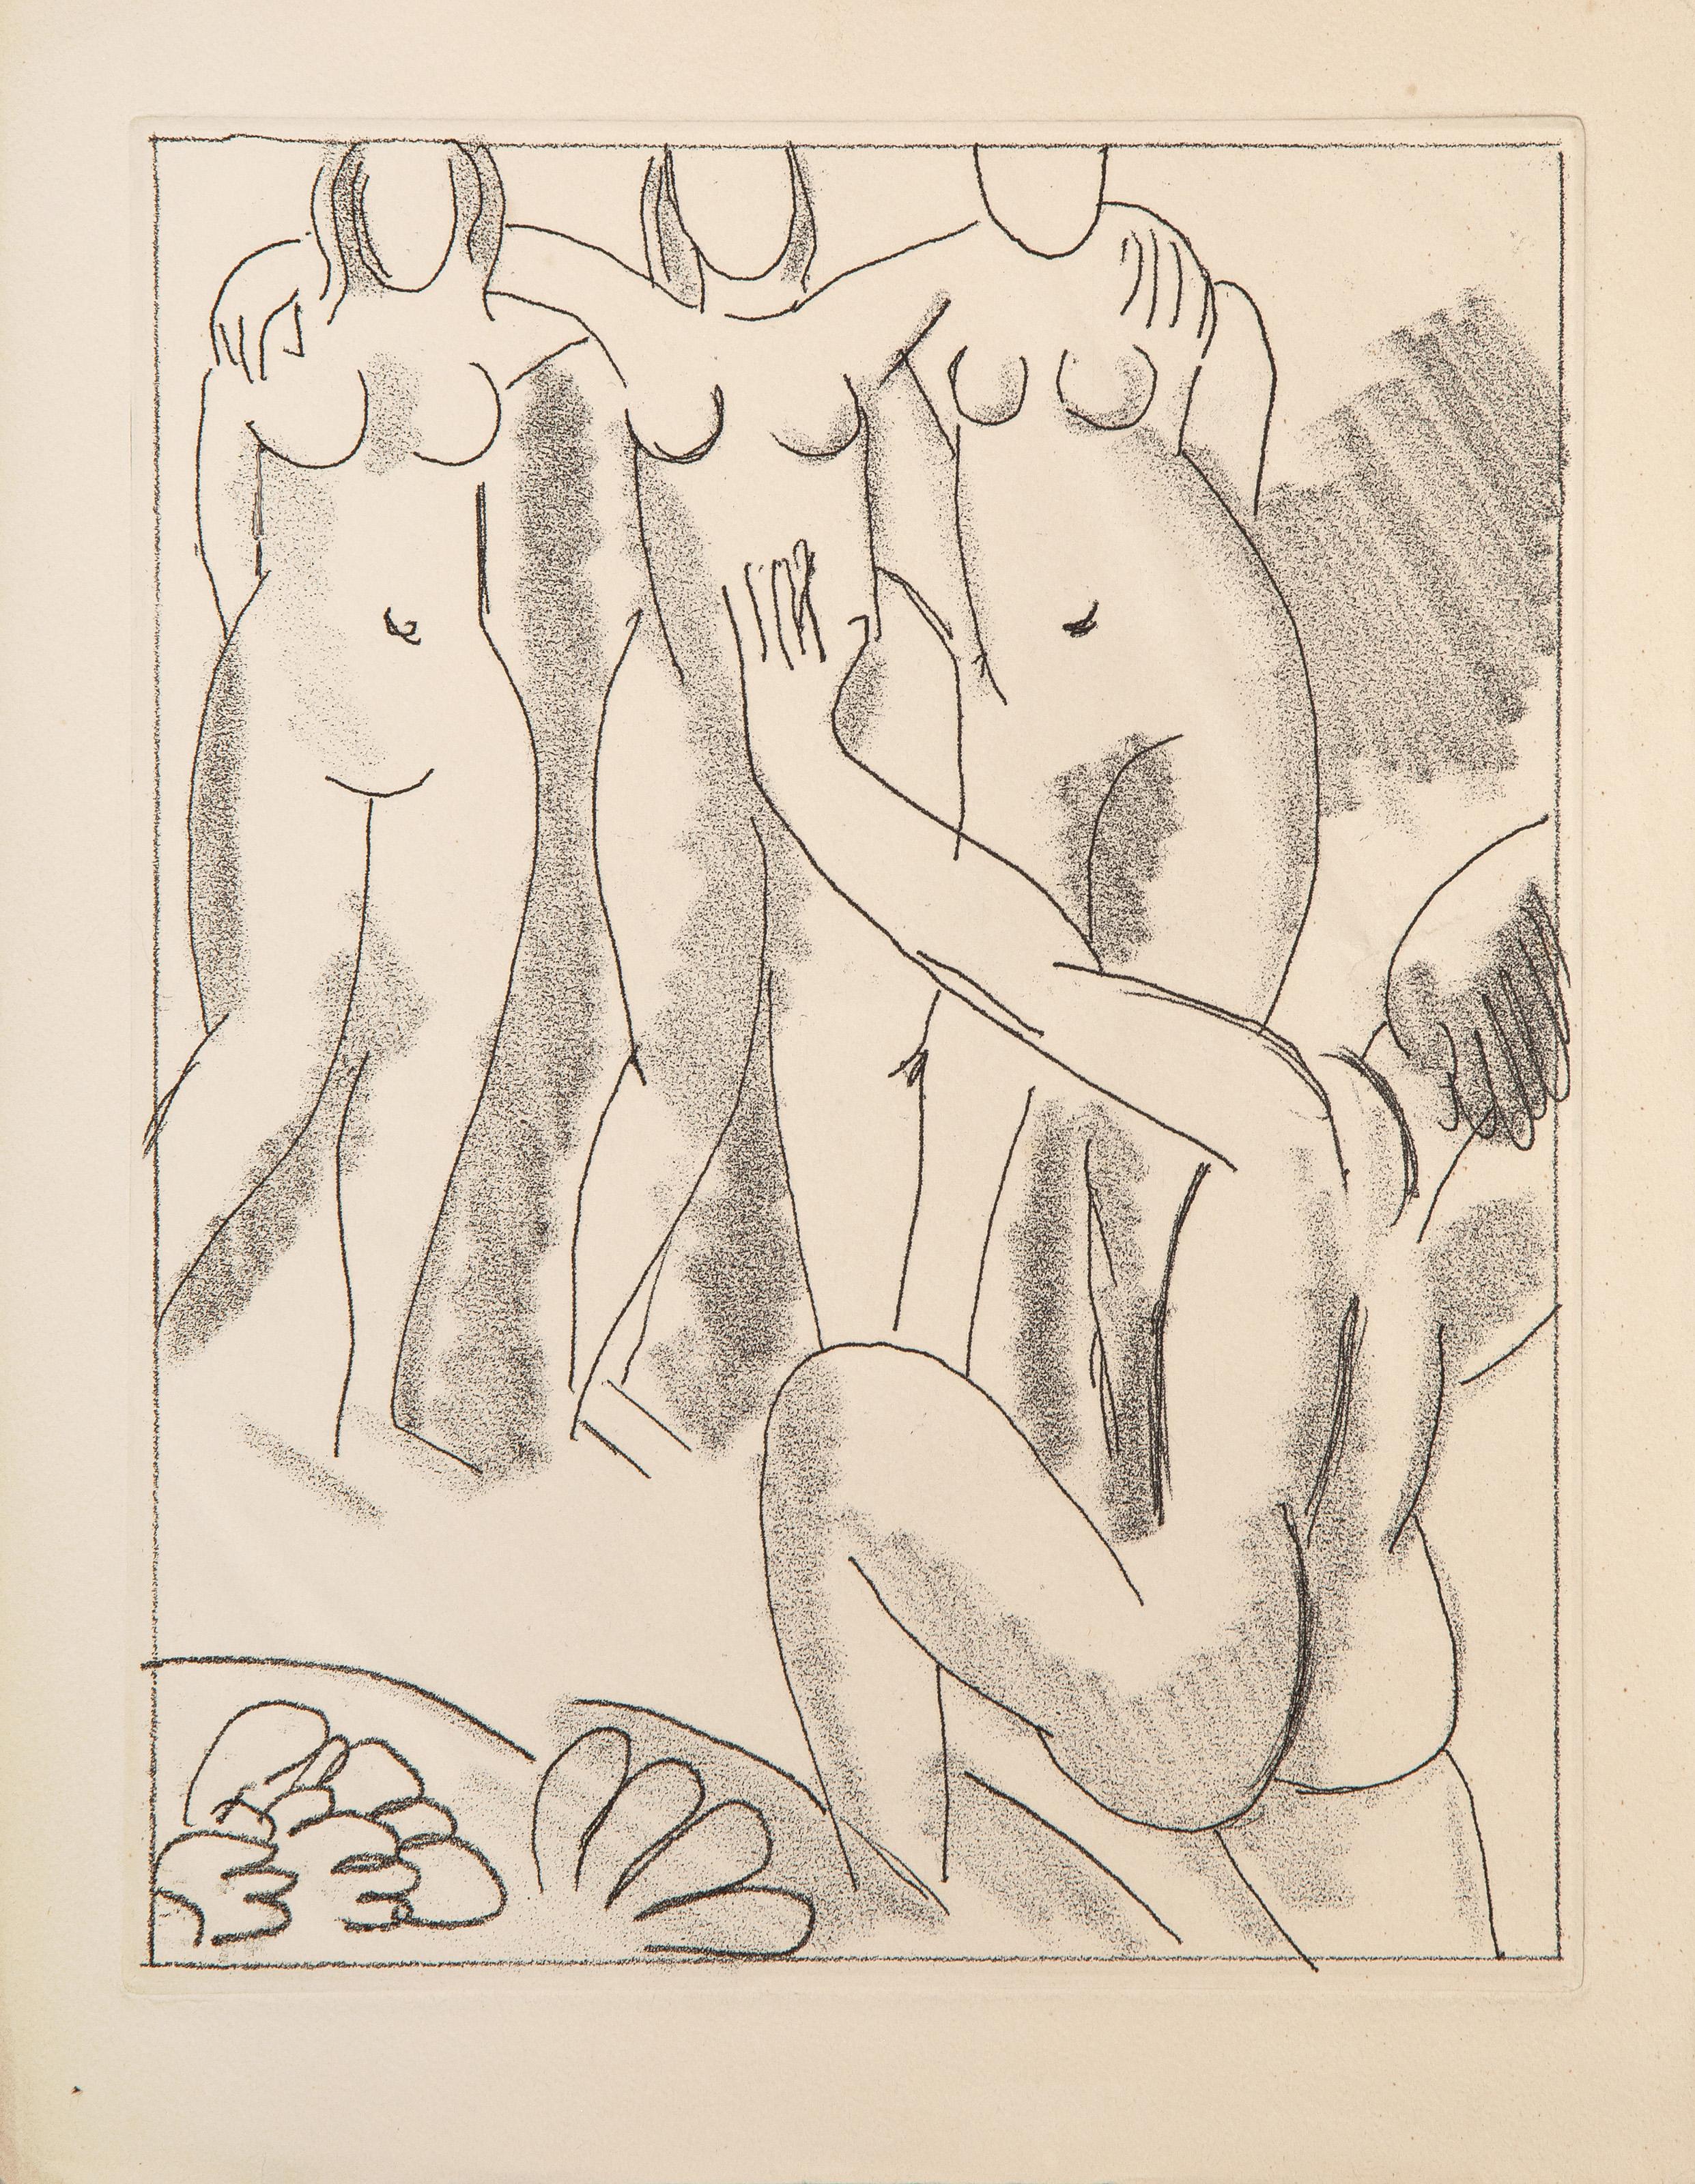 What is Henri Matisse's artistic style called?